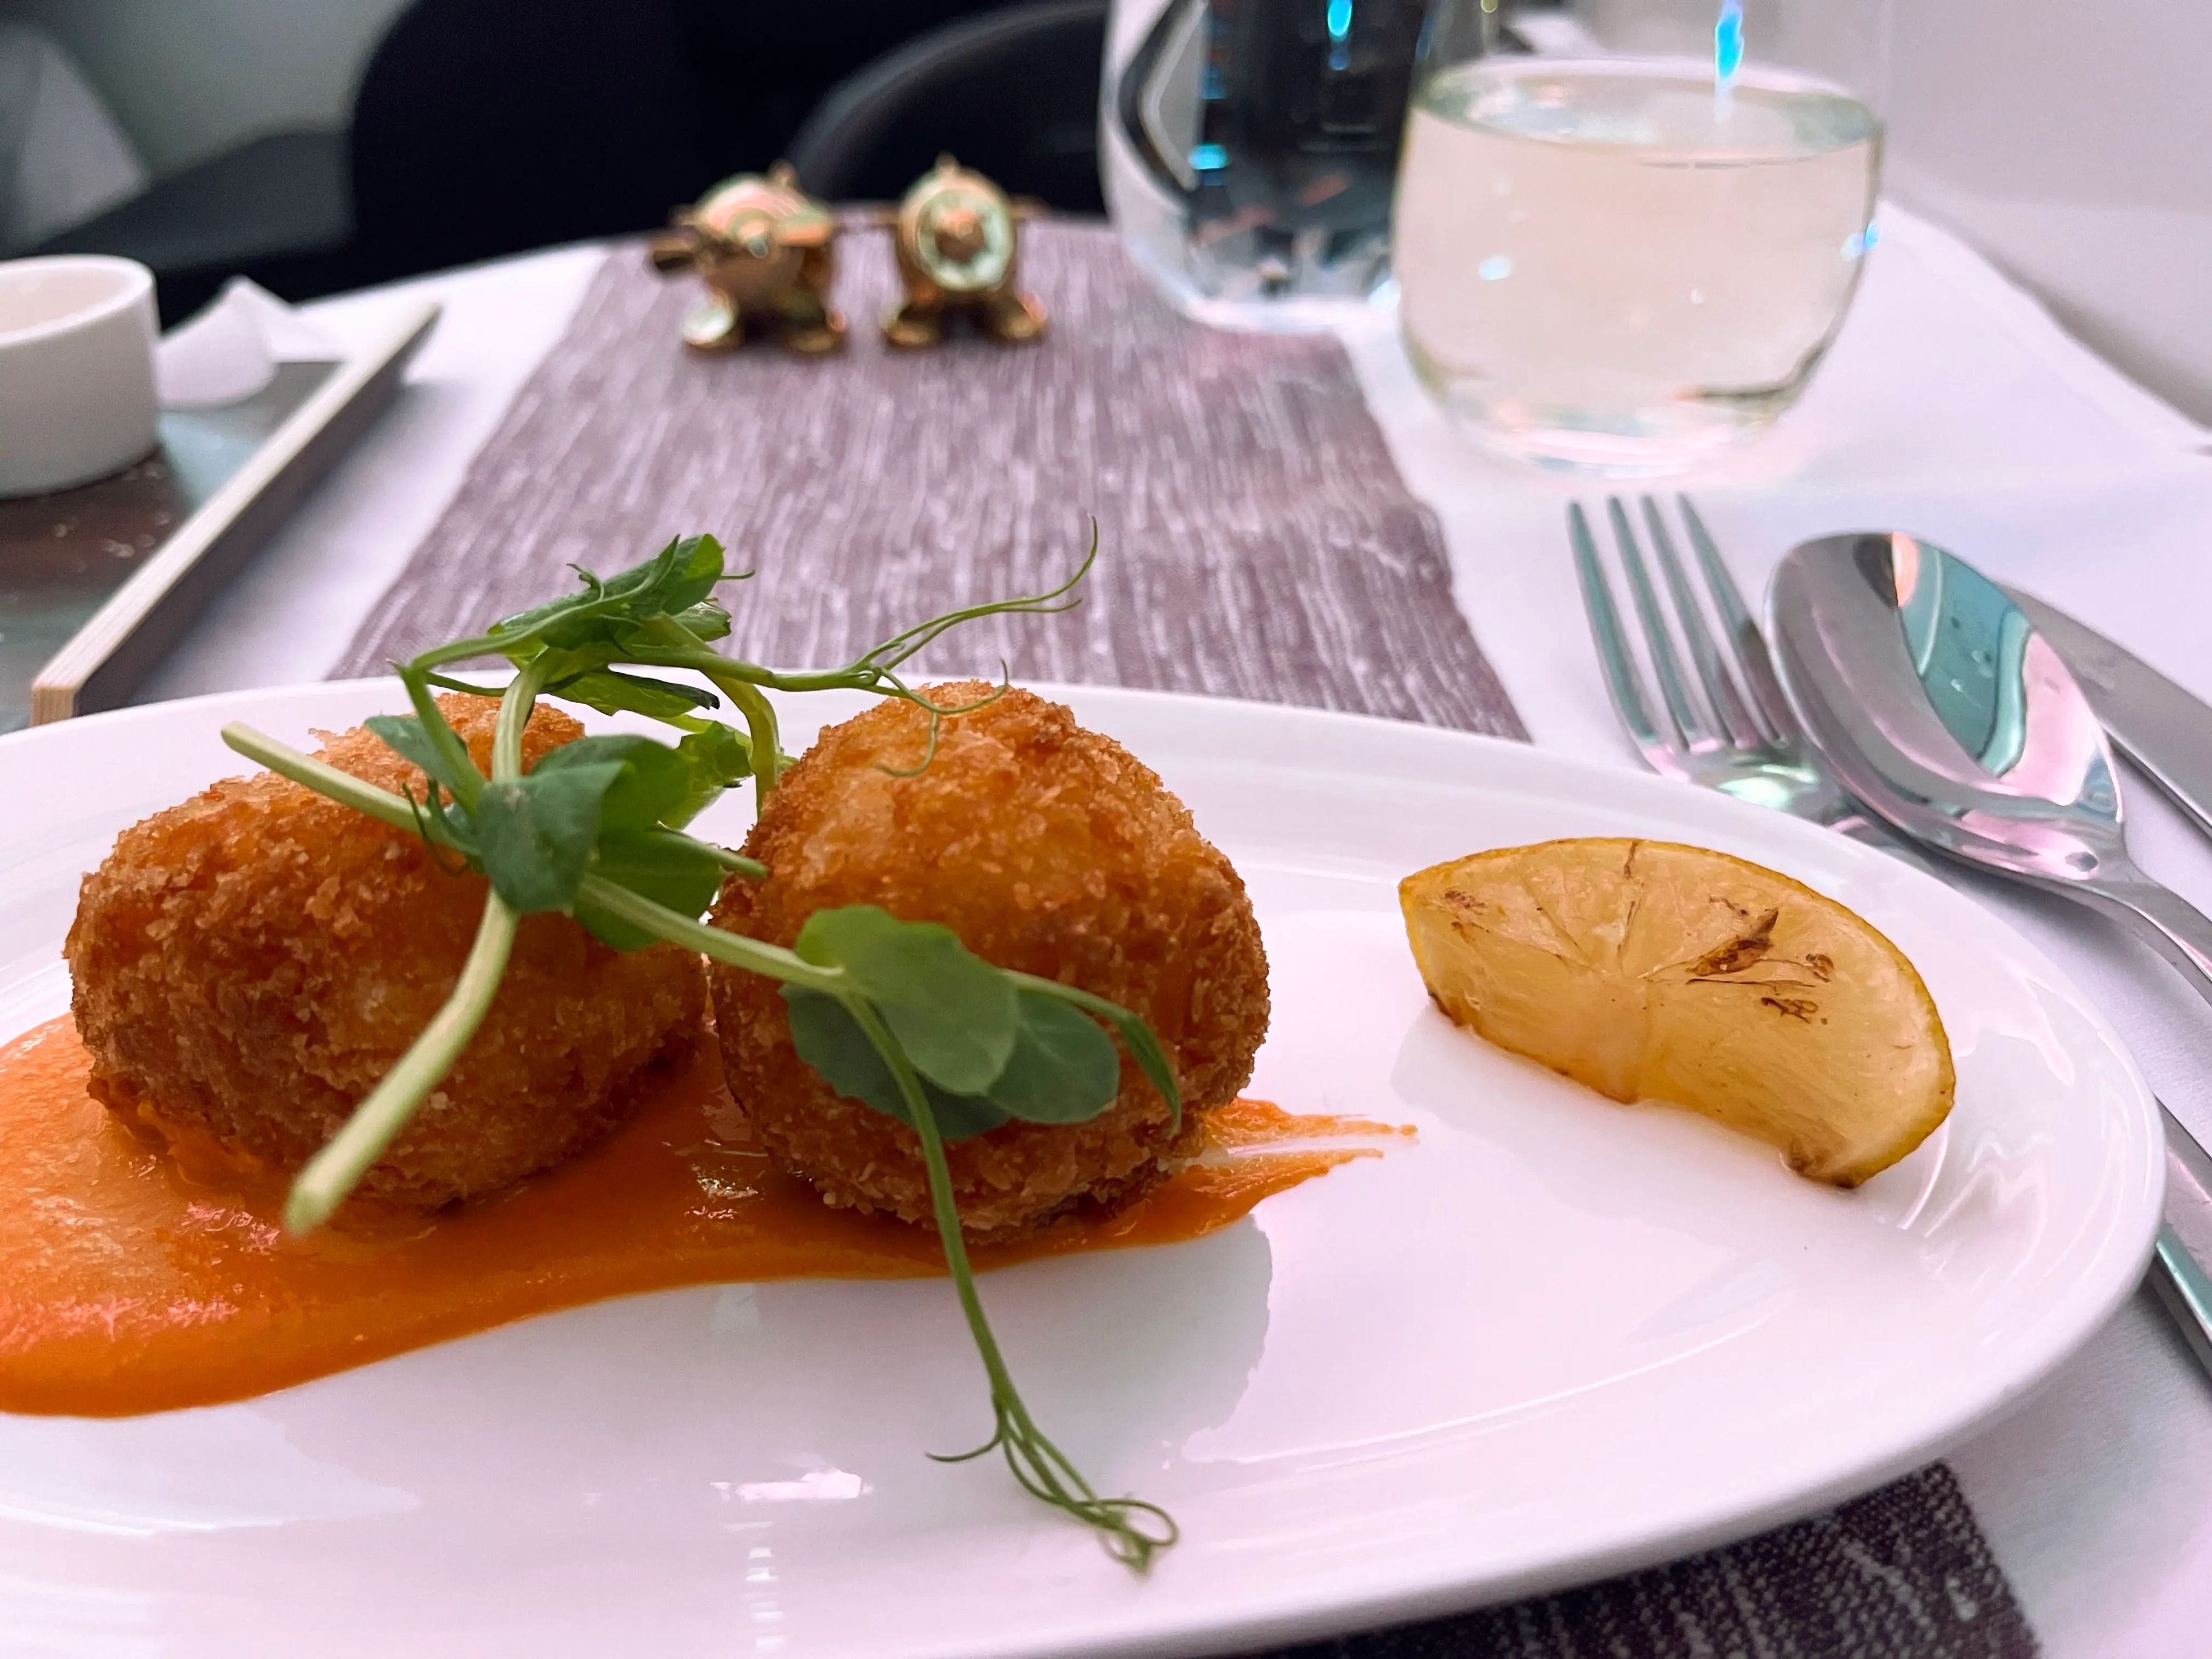 Butternut squash and sage arancini with sprigs of microgreens and a lemon wedge on the side. A table setting on an airplane tray is visible in the background